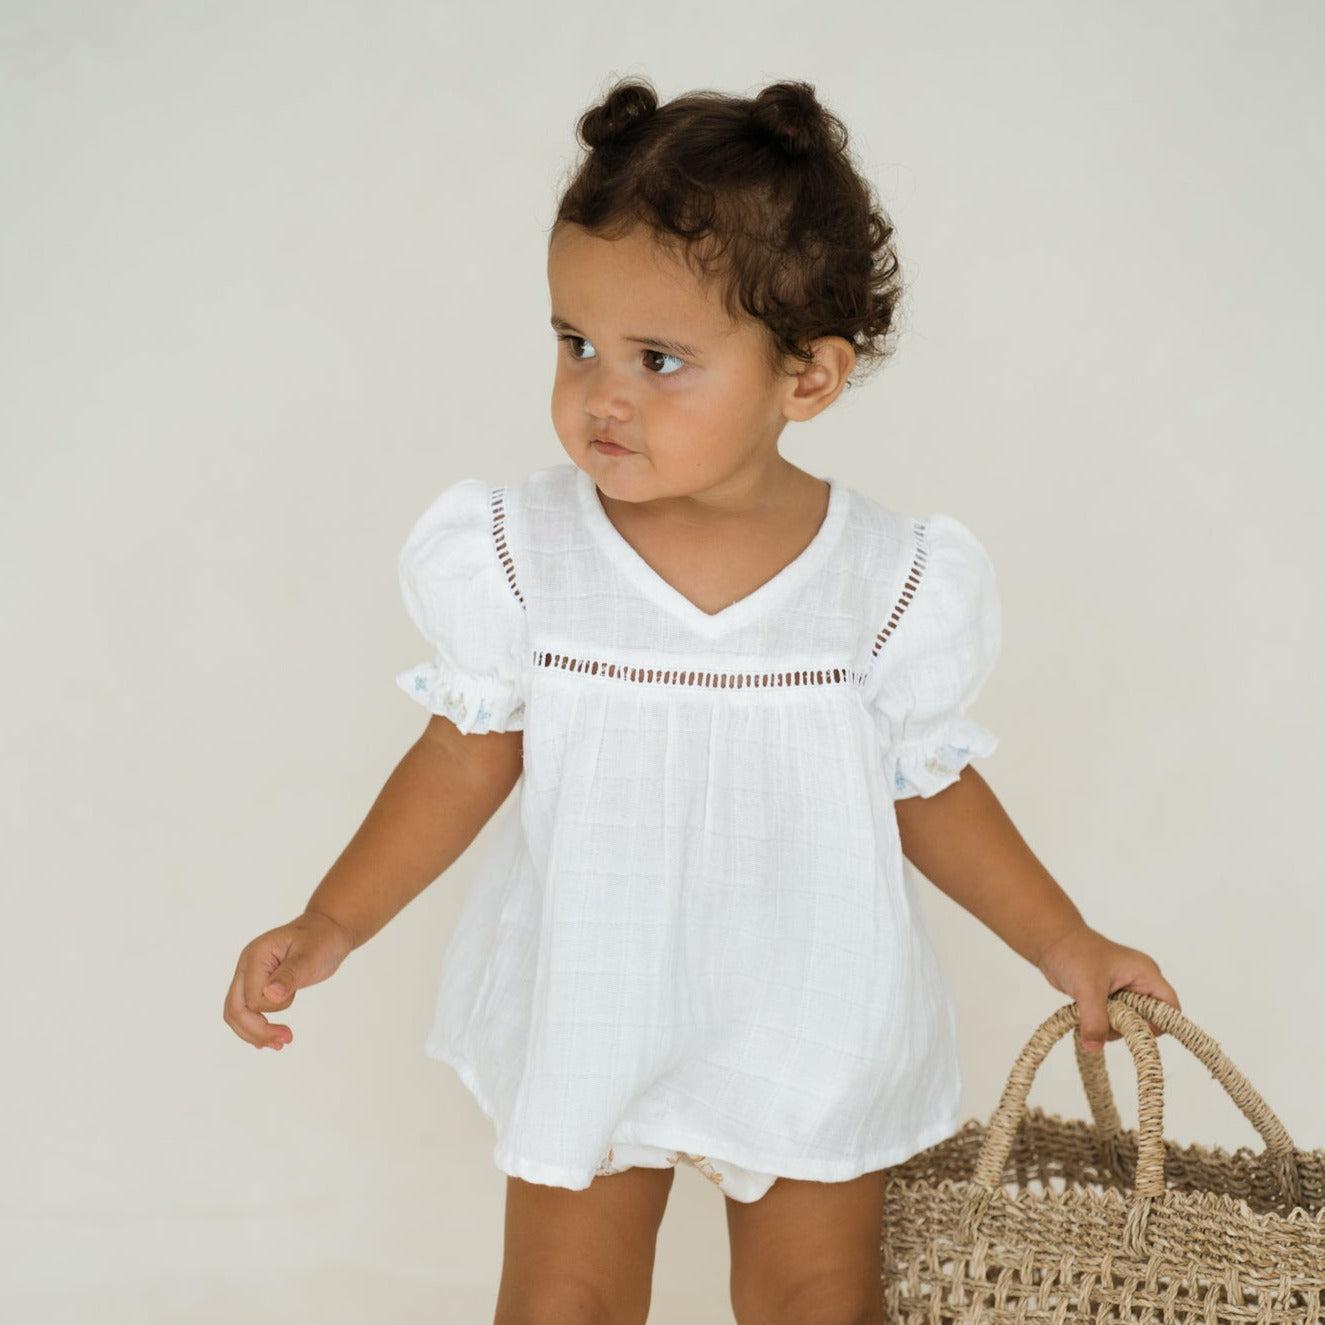 A baby girl wearing Illoura the Label's hand-embroidered floral-trimmed white clover blouse & bloomer set and carrying a vintage-inspired basket.